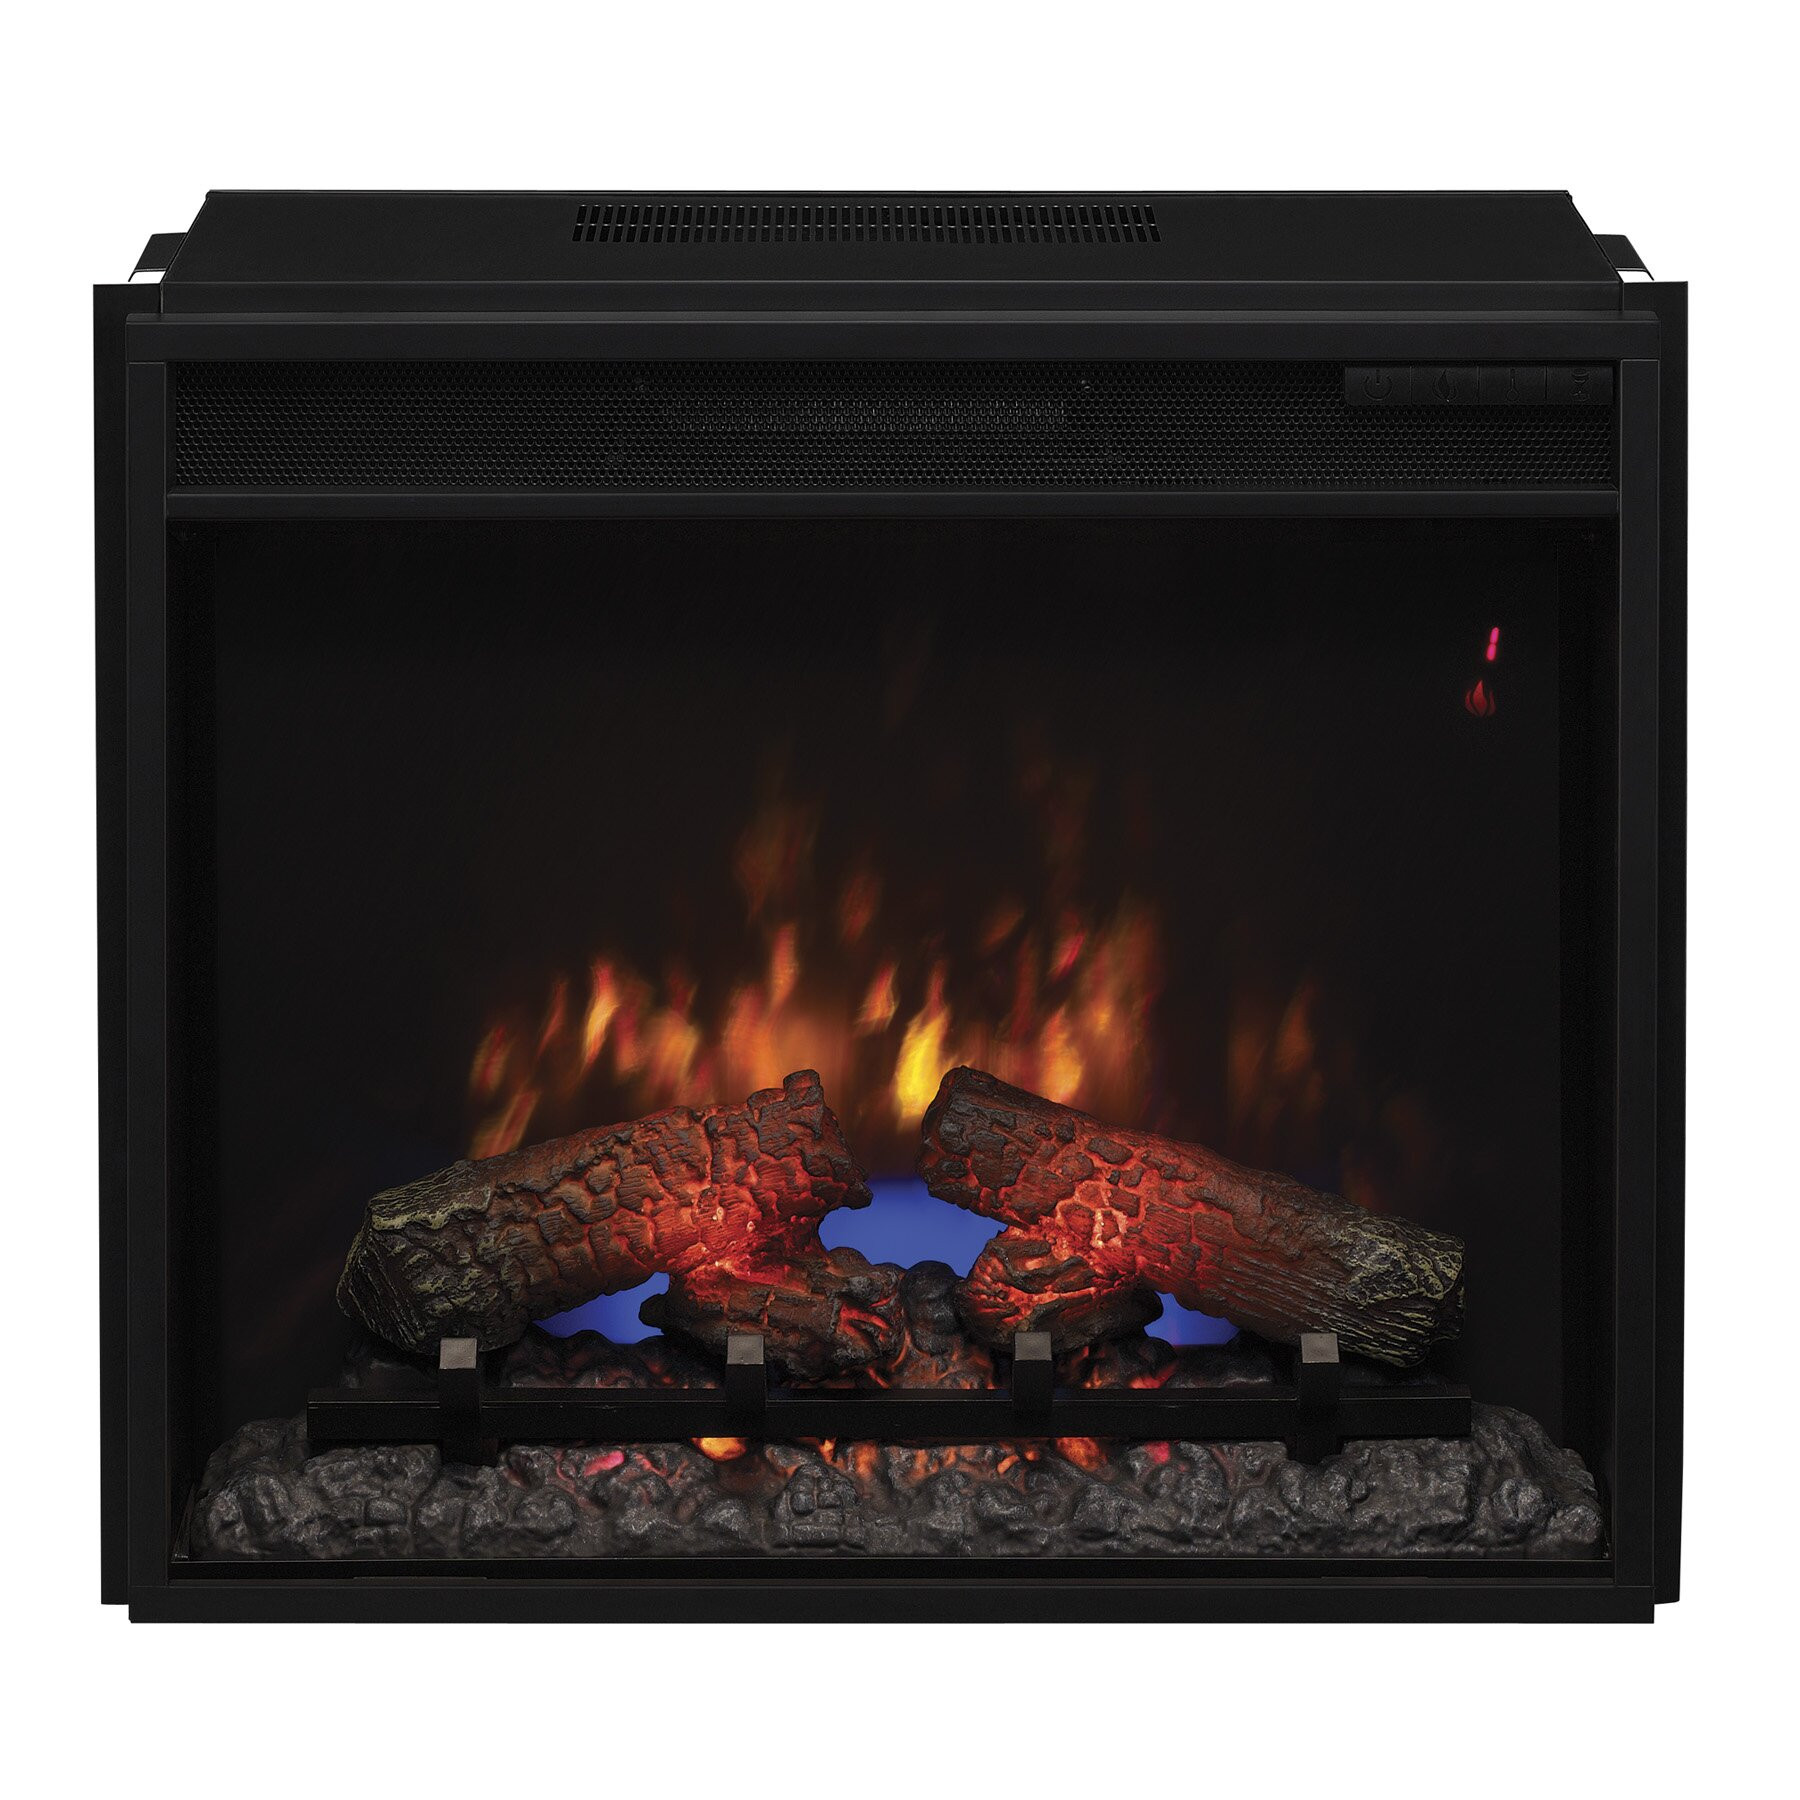 Classic Flame Electric Fireplace Insert
 Classic Flame Electric Fireplace Insert & Reviews